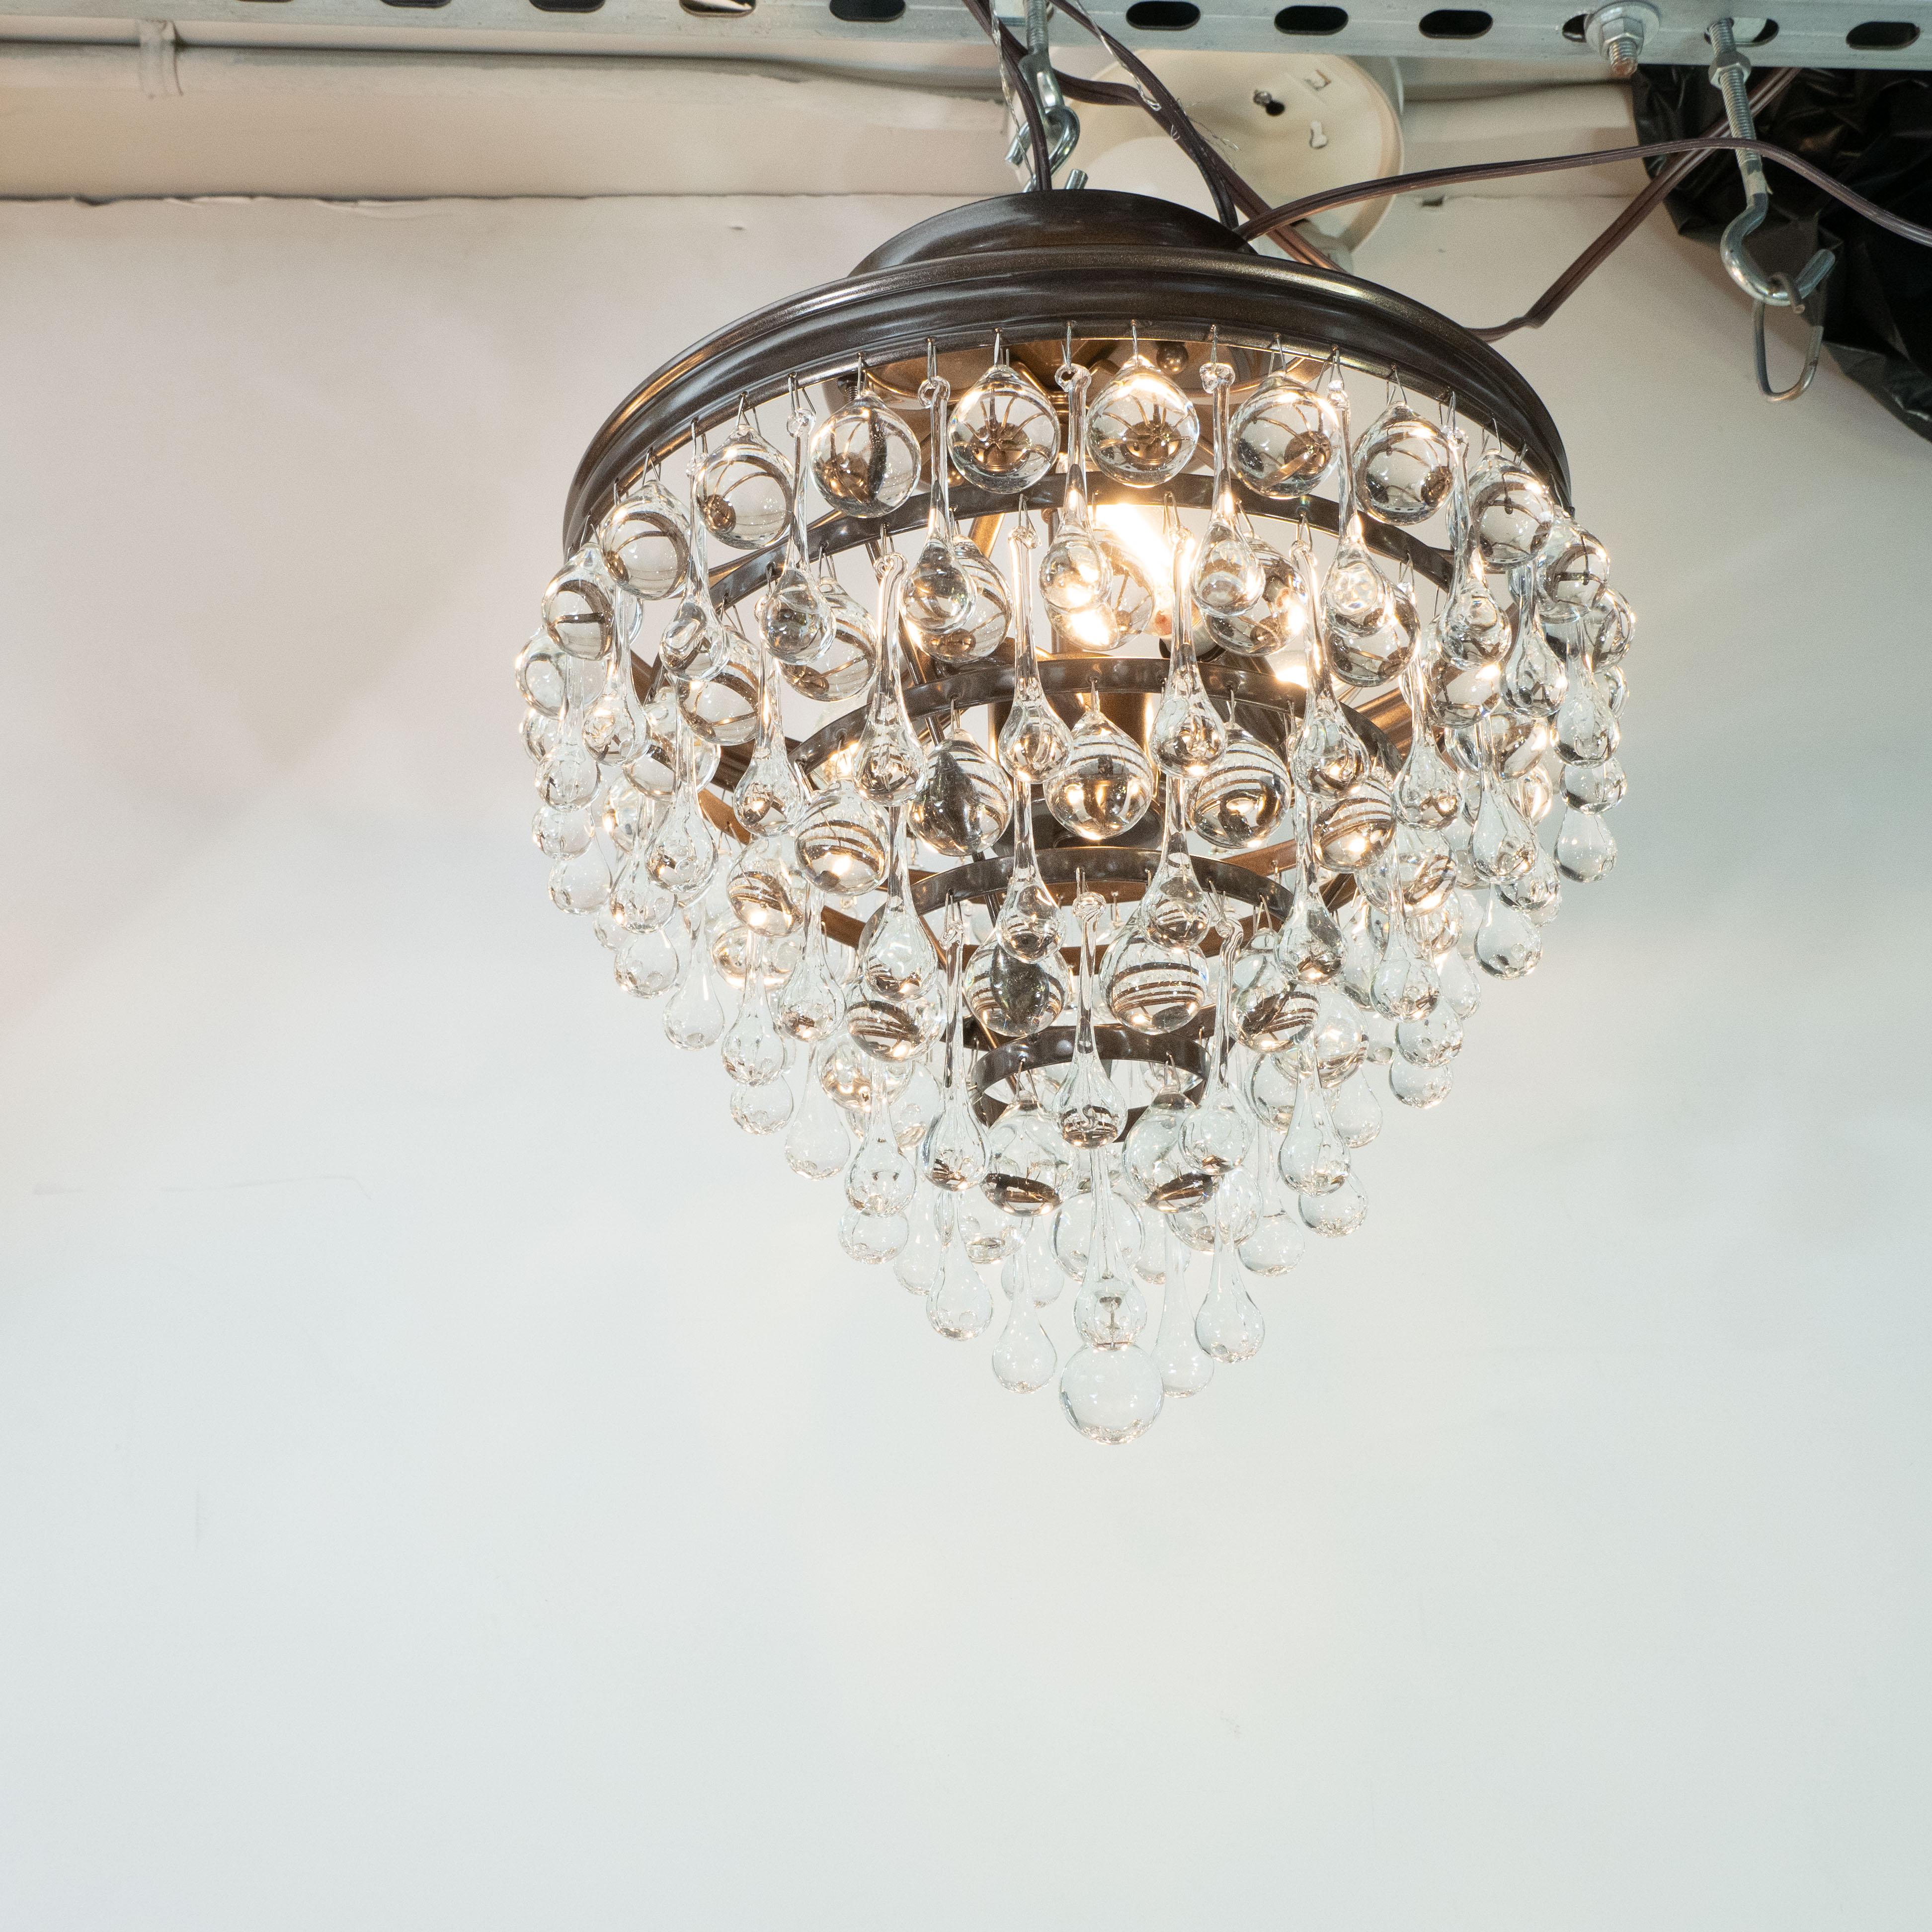 This stunning five-tier modernist chandelier was realized in the United States. The fixture offers an abundance of hand blown translucent tear drop forms hanging from an oil rubbed bronze body. At once sophisticated and whimsical, this piece